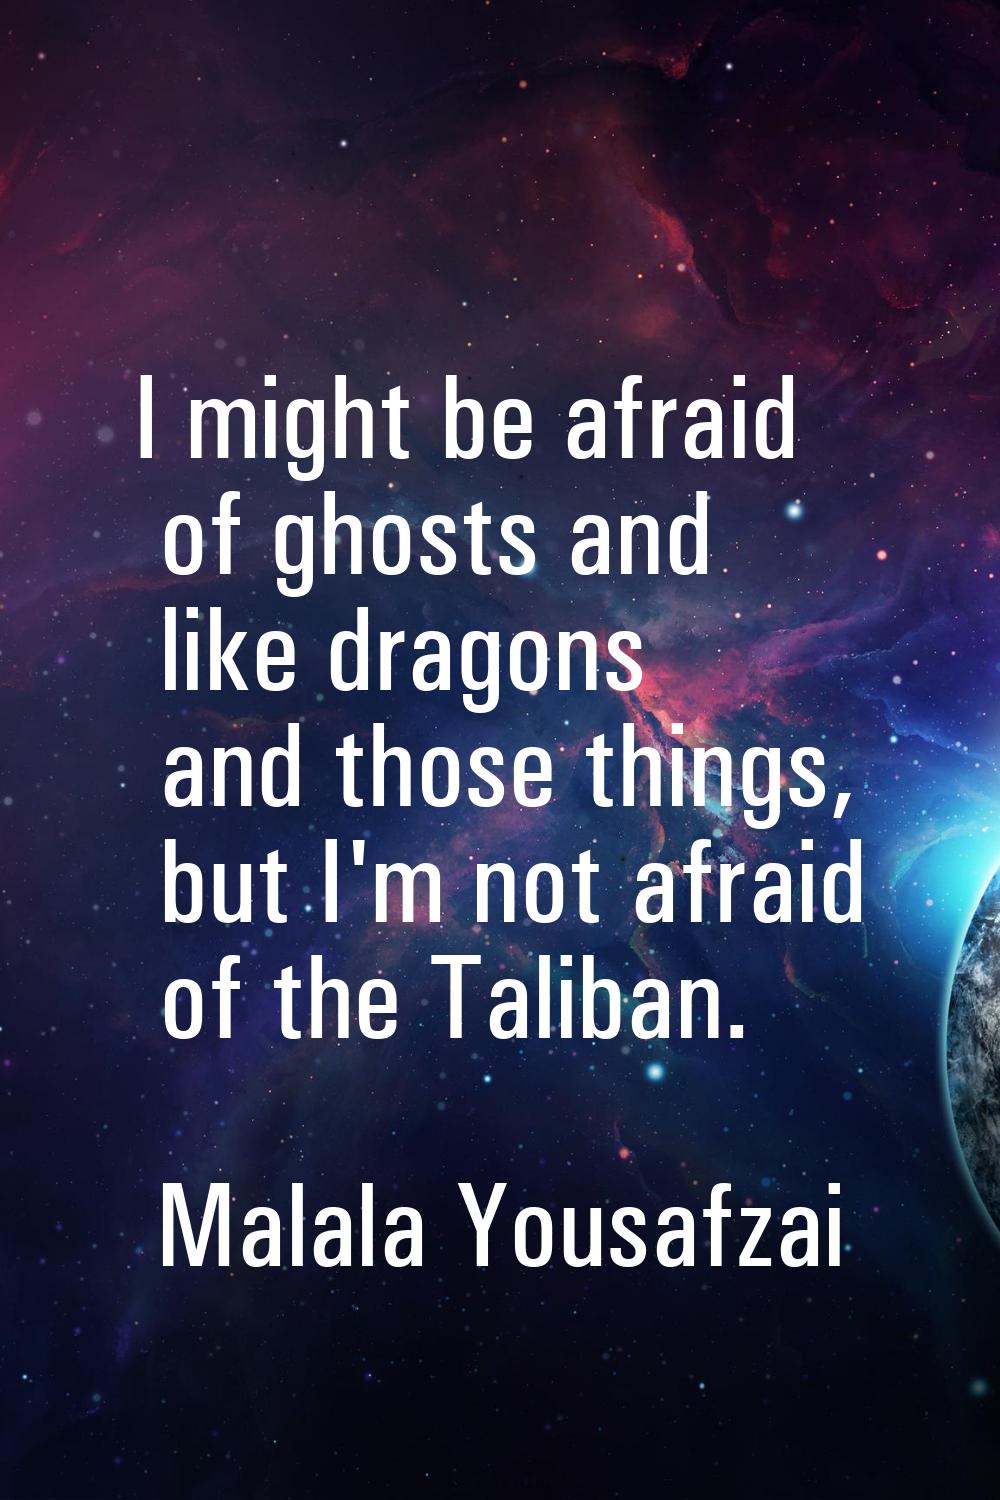 I might be afraid of ghosts and like dragons and those things, but I'm not afraid of the Taliban.